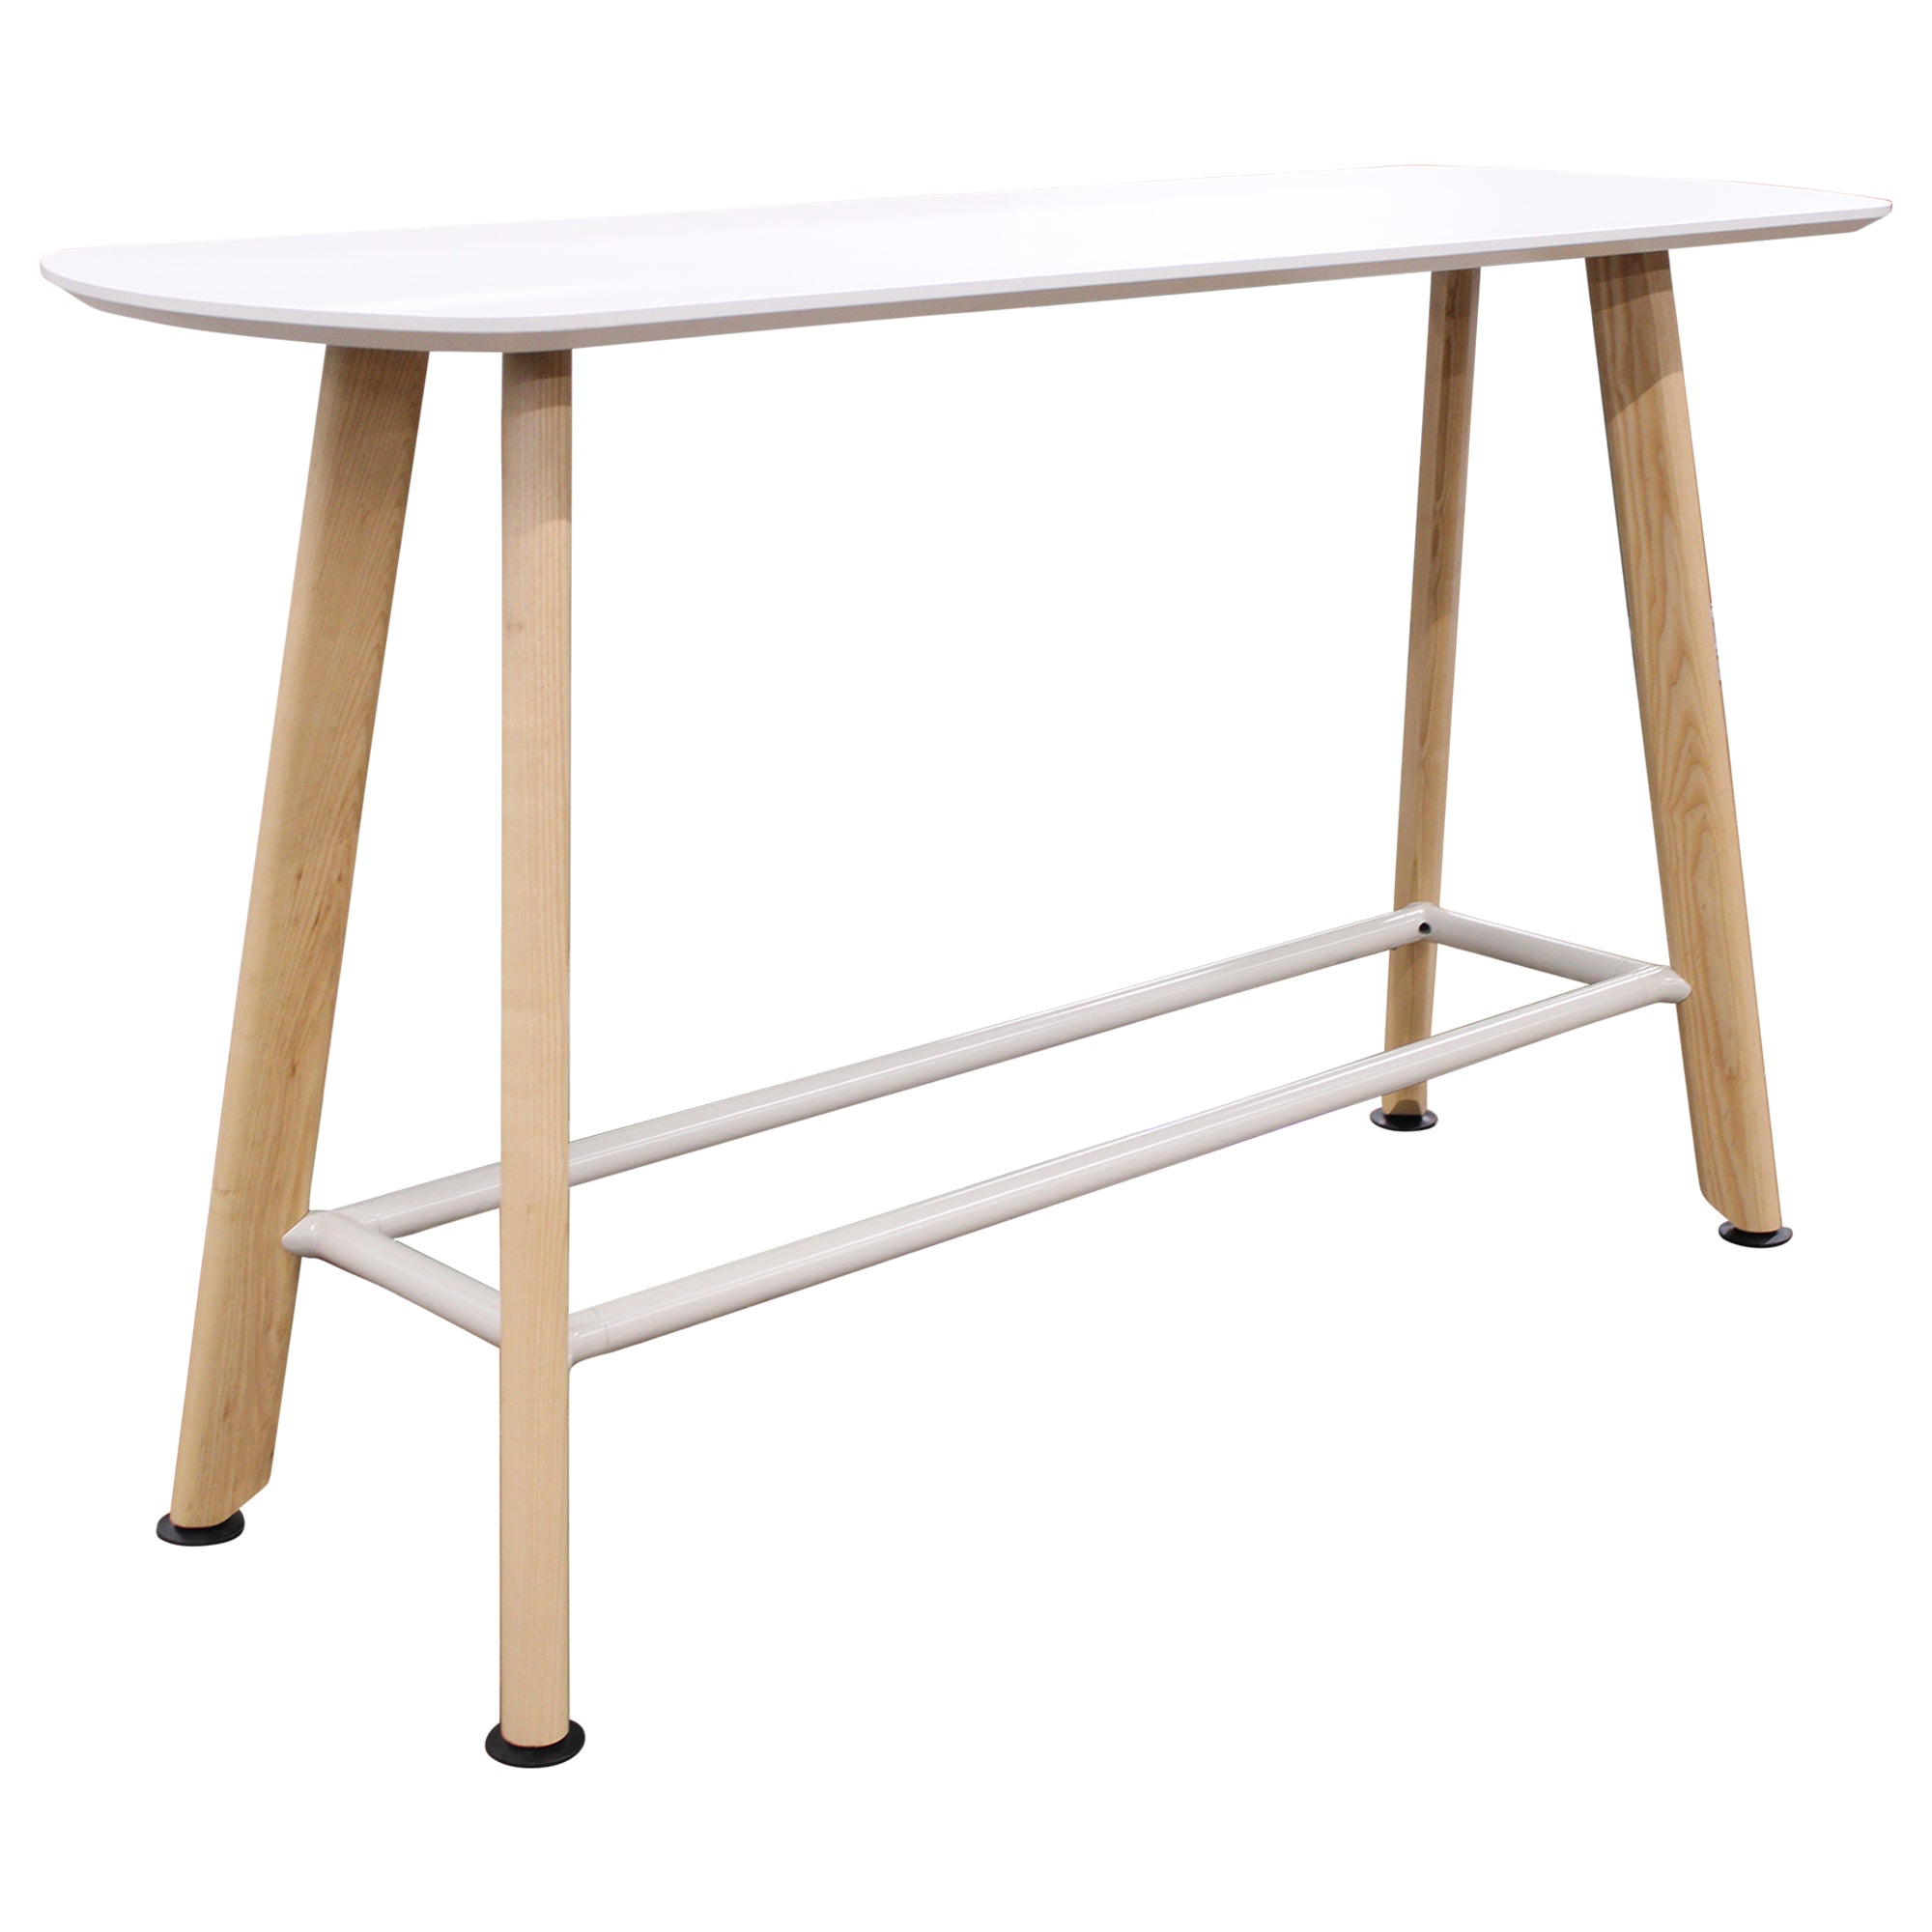 OFS Heya Table, White - Preowned